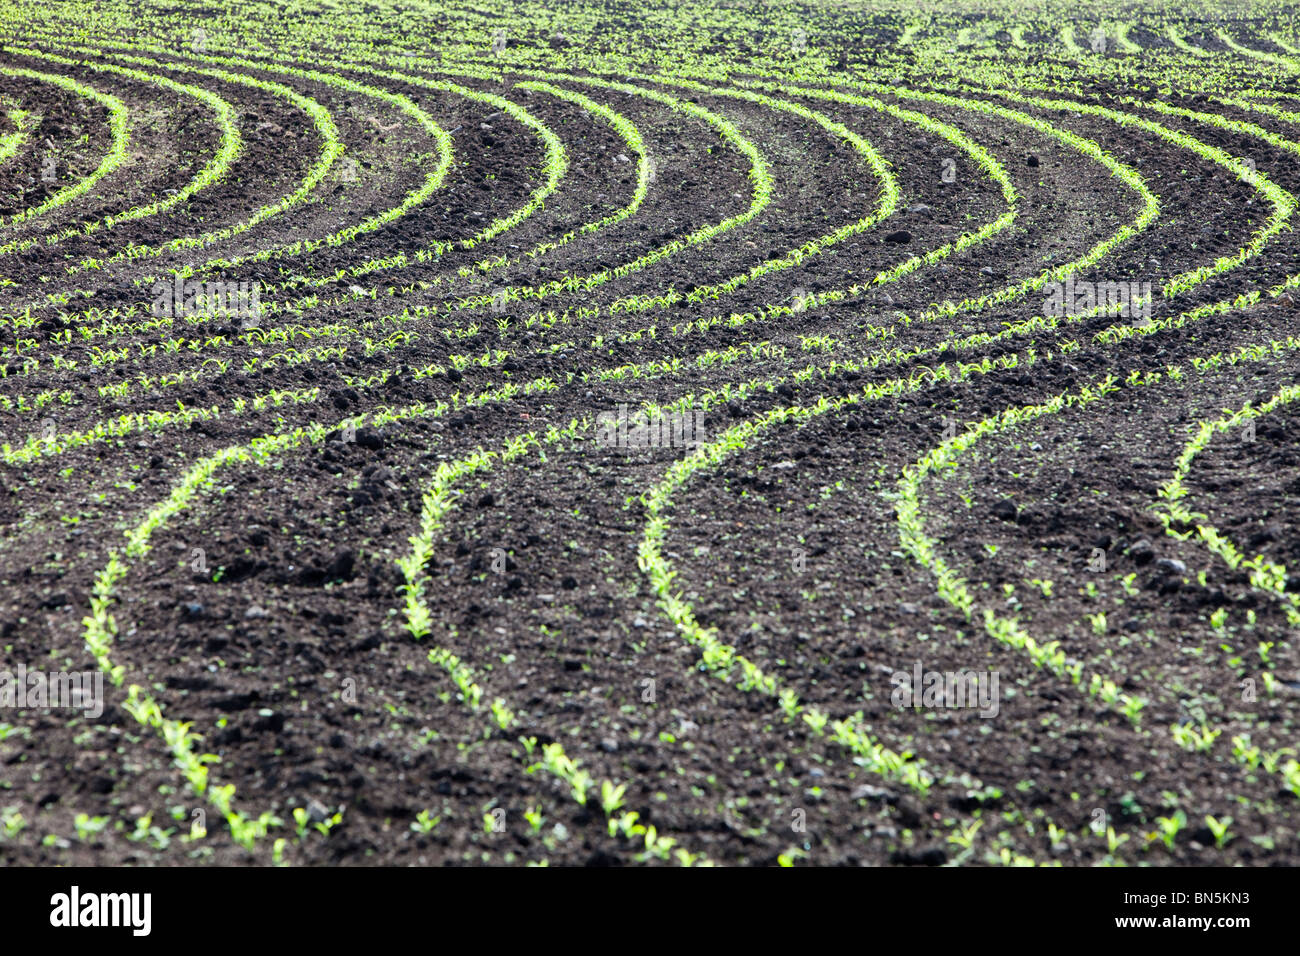 Maize crops planted in a wavy line in a field near Zennor in Cornwall, UK. Stock Photo